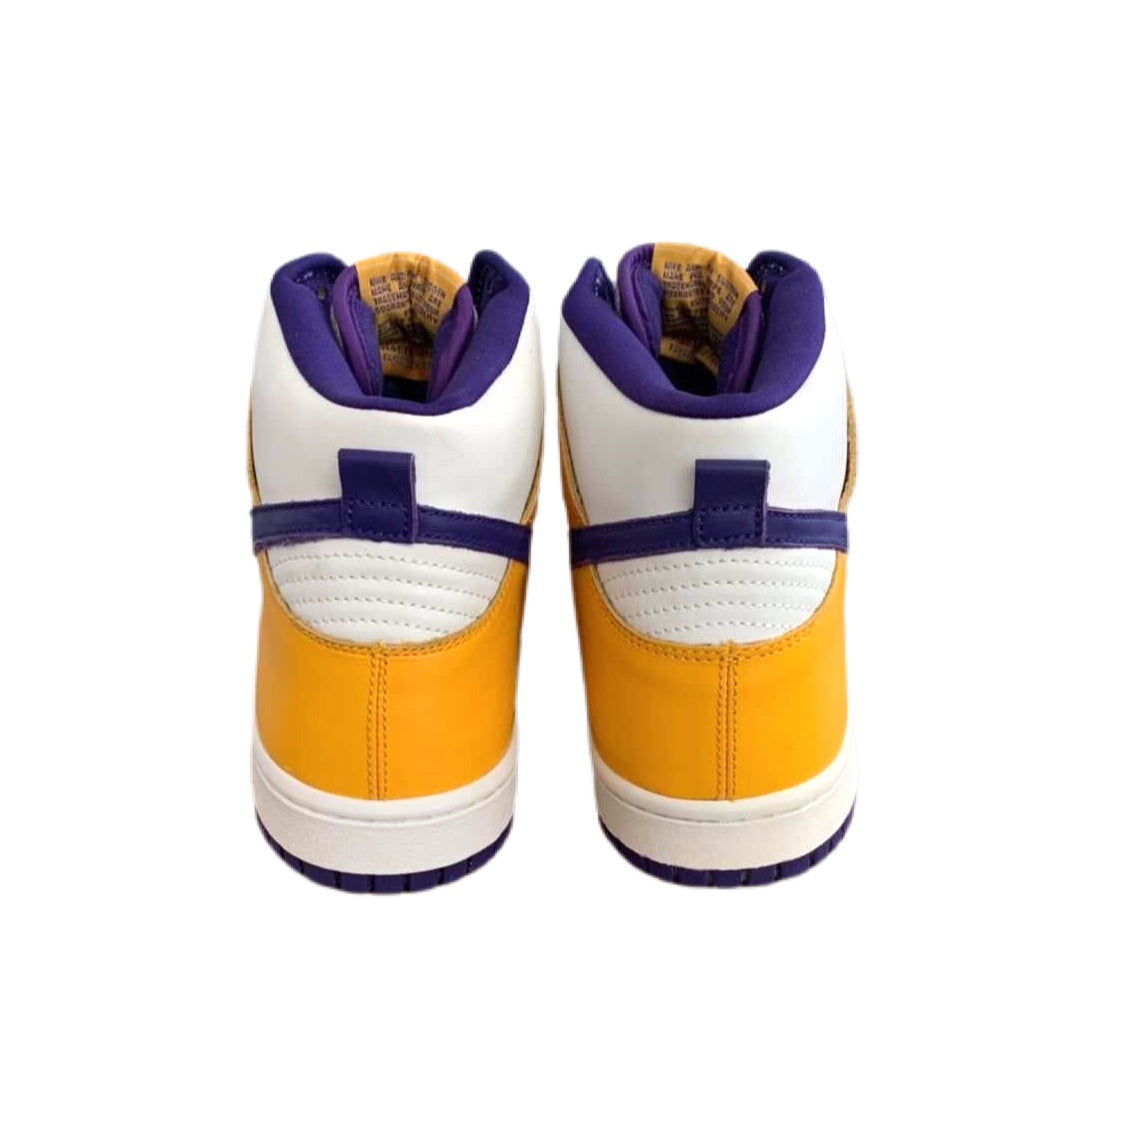 Nike Dunk High Retro *Lakers* – buy now at Asphaltgold Online Store!